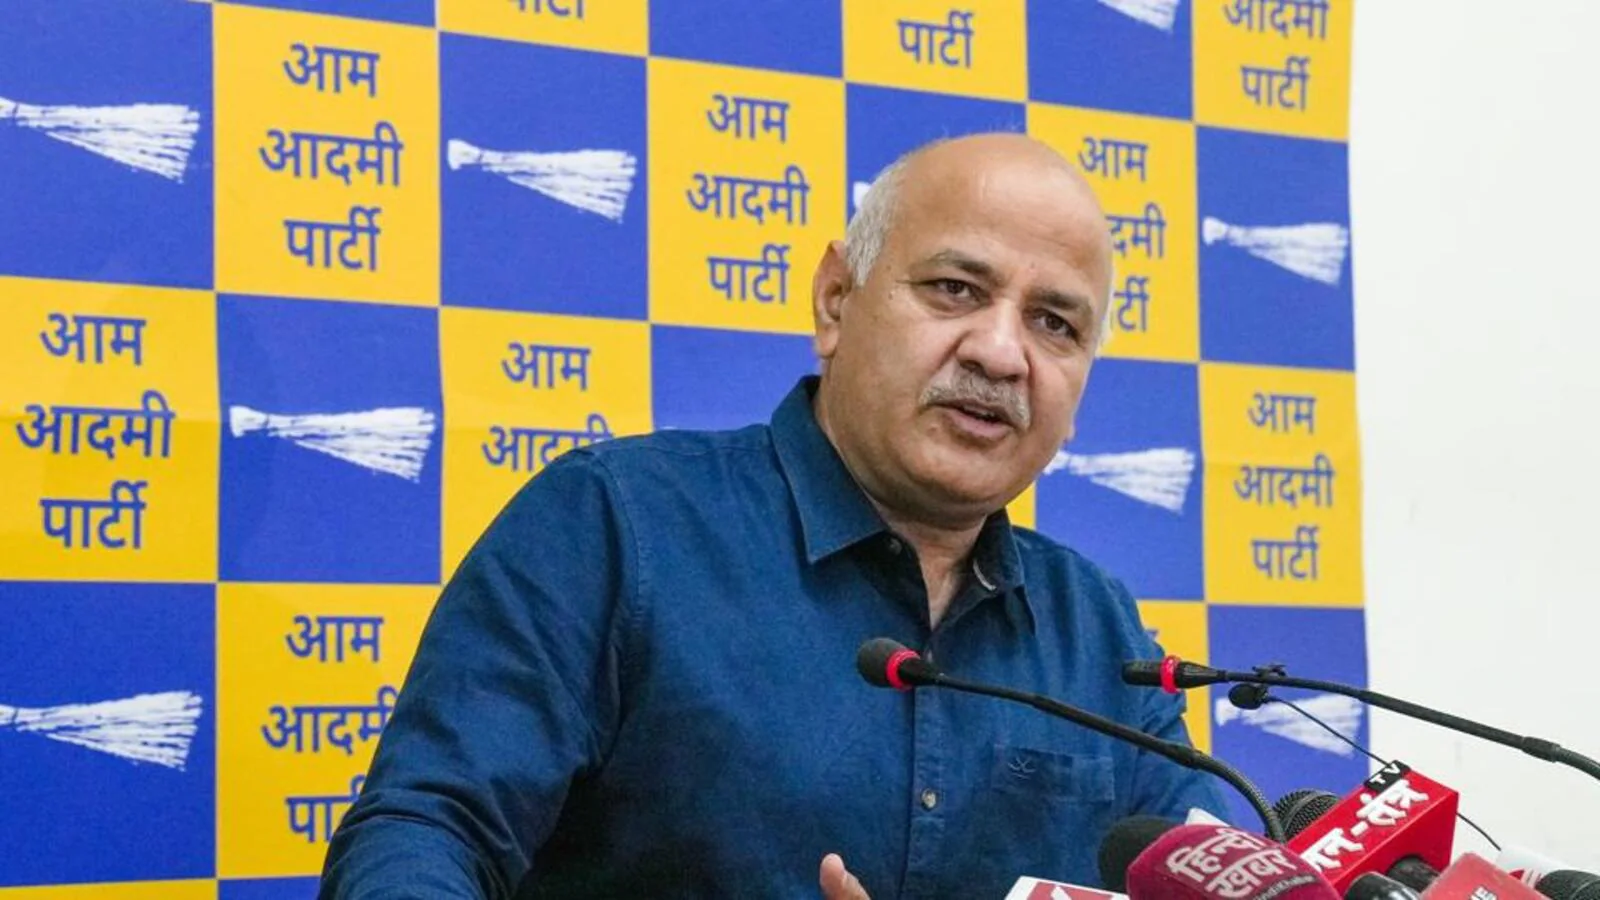 BJP may replace Himachal CM due to popularity of AAP: Manish Sisodia